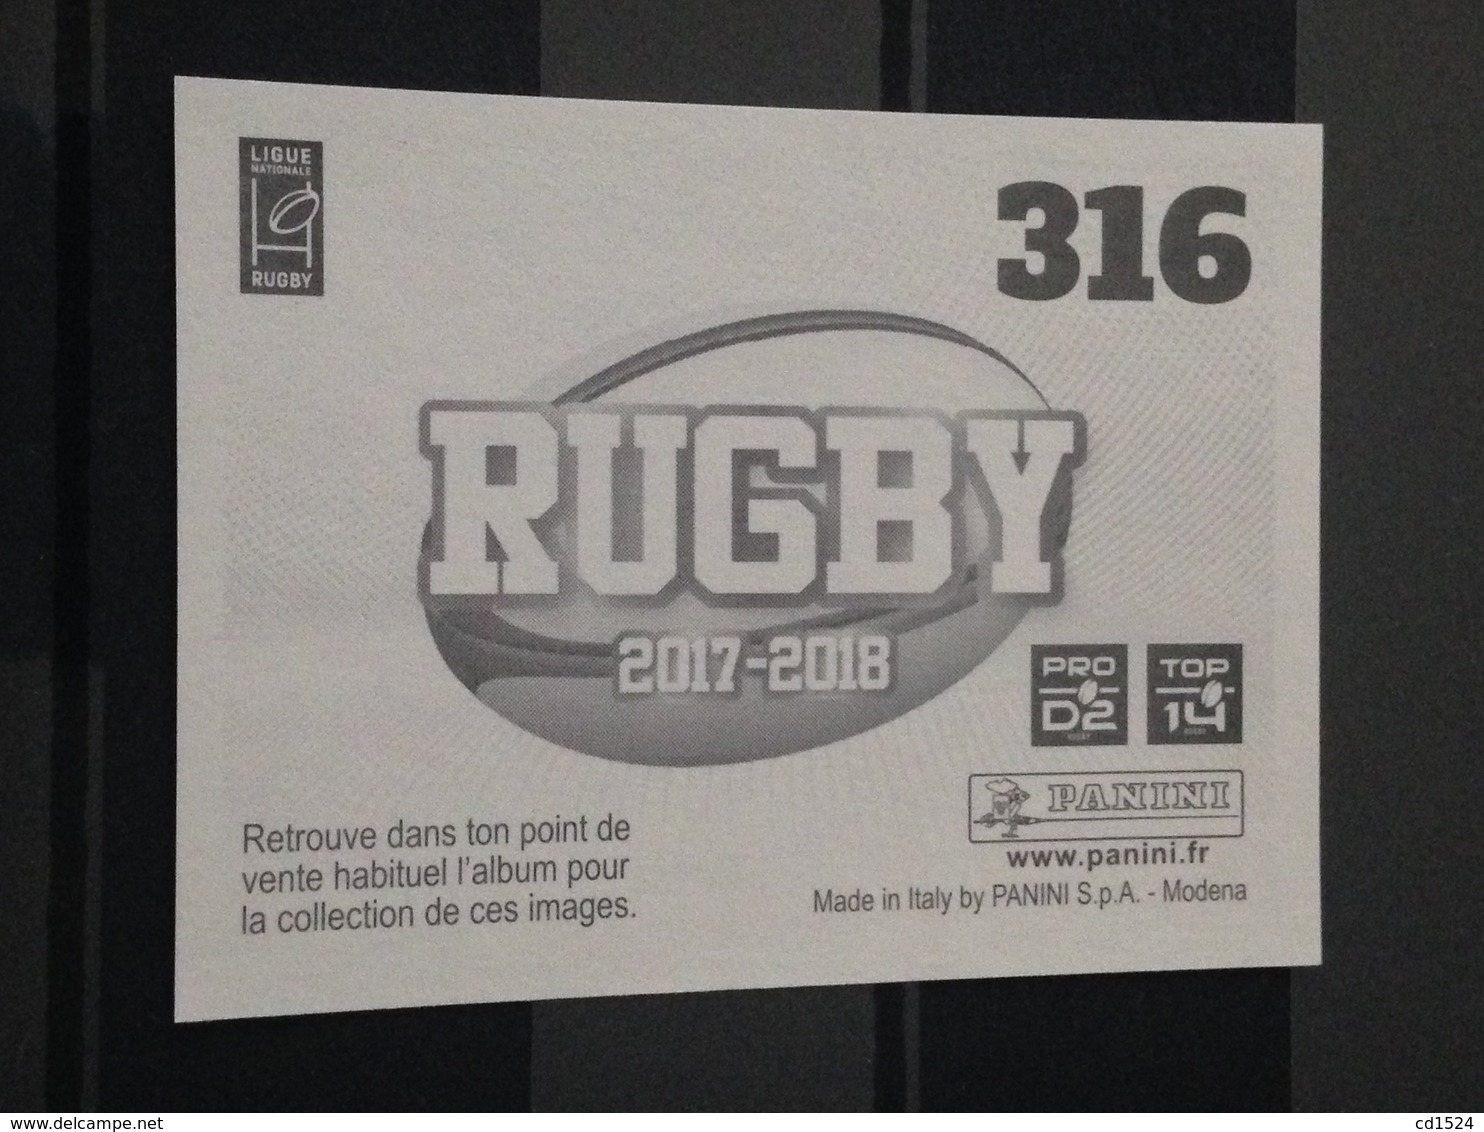 Image Album Panini - Rugby 2017-2018 - N° 316 - French Edition